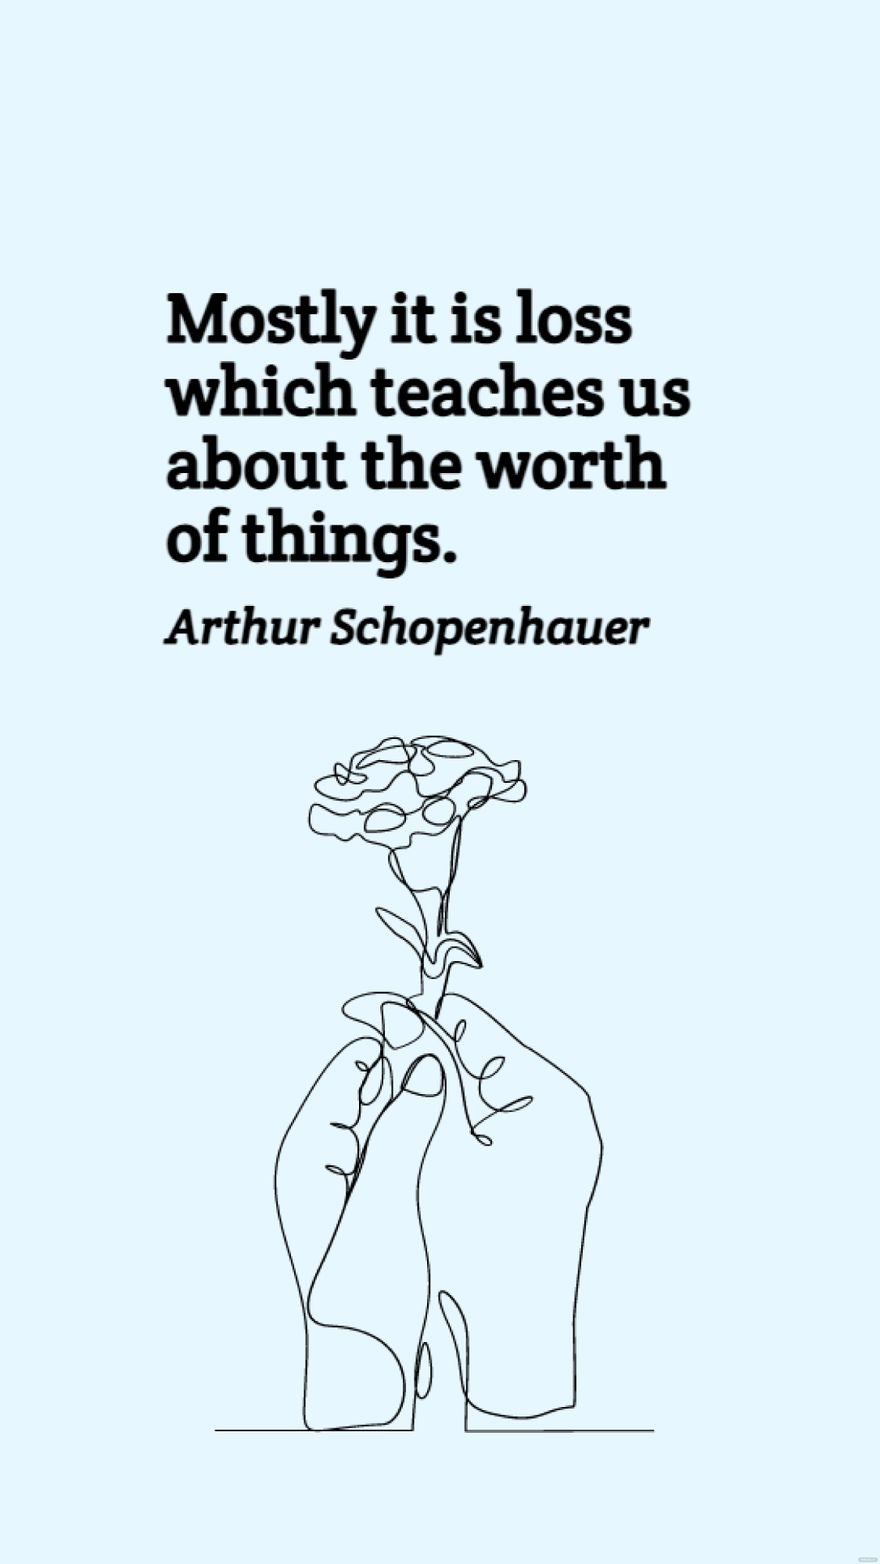 Free Arthur Schopenhauer - Mostly it is loss which teaches us about the worth of things. in JPG